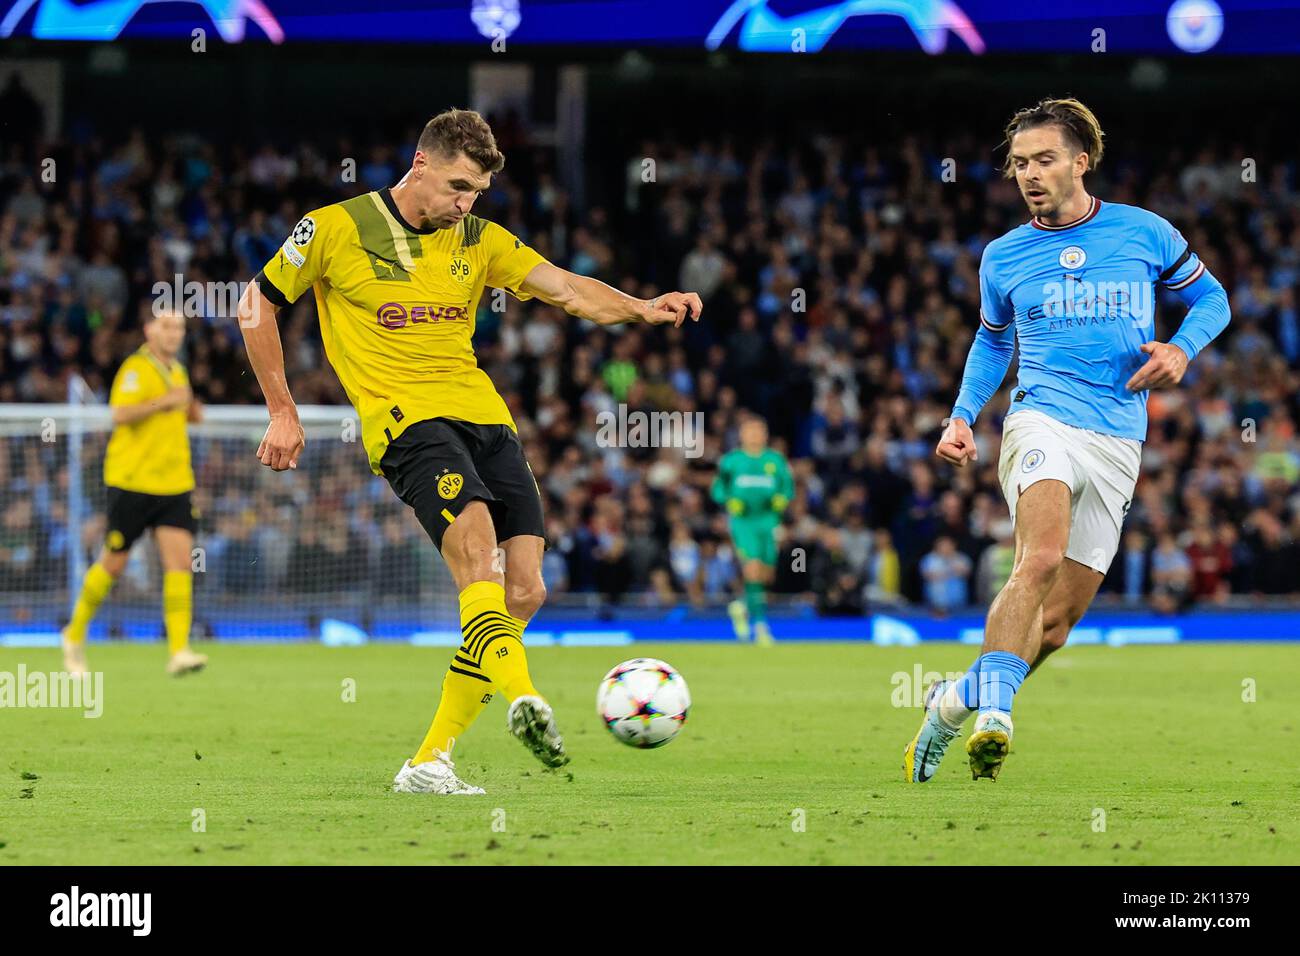 Manchester, UK. 14th Sep, 2022. Thomas Meunier #24 of Borussia Dortmund crosses the ball during the UEFA Champions League match Manchester City vs Borussia Dortmund at Etihad Stadium, Manchester, United Kingdom, 14th September 2022 (Photo by Conor Molloy/News Images) Credit: News Images LTD/Alamy Live News Stock Photo